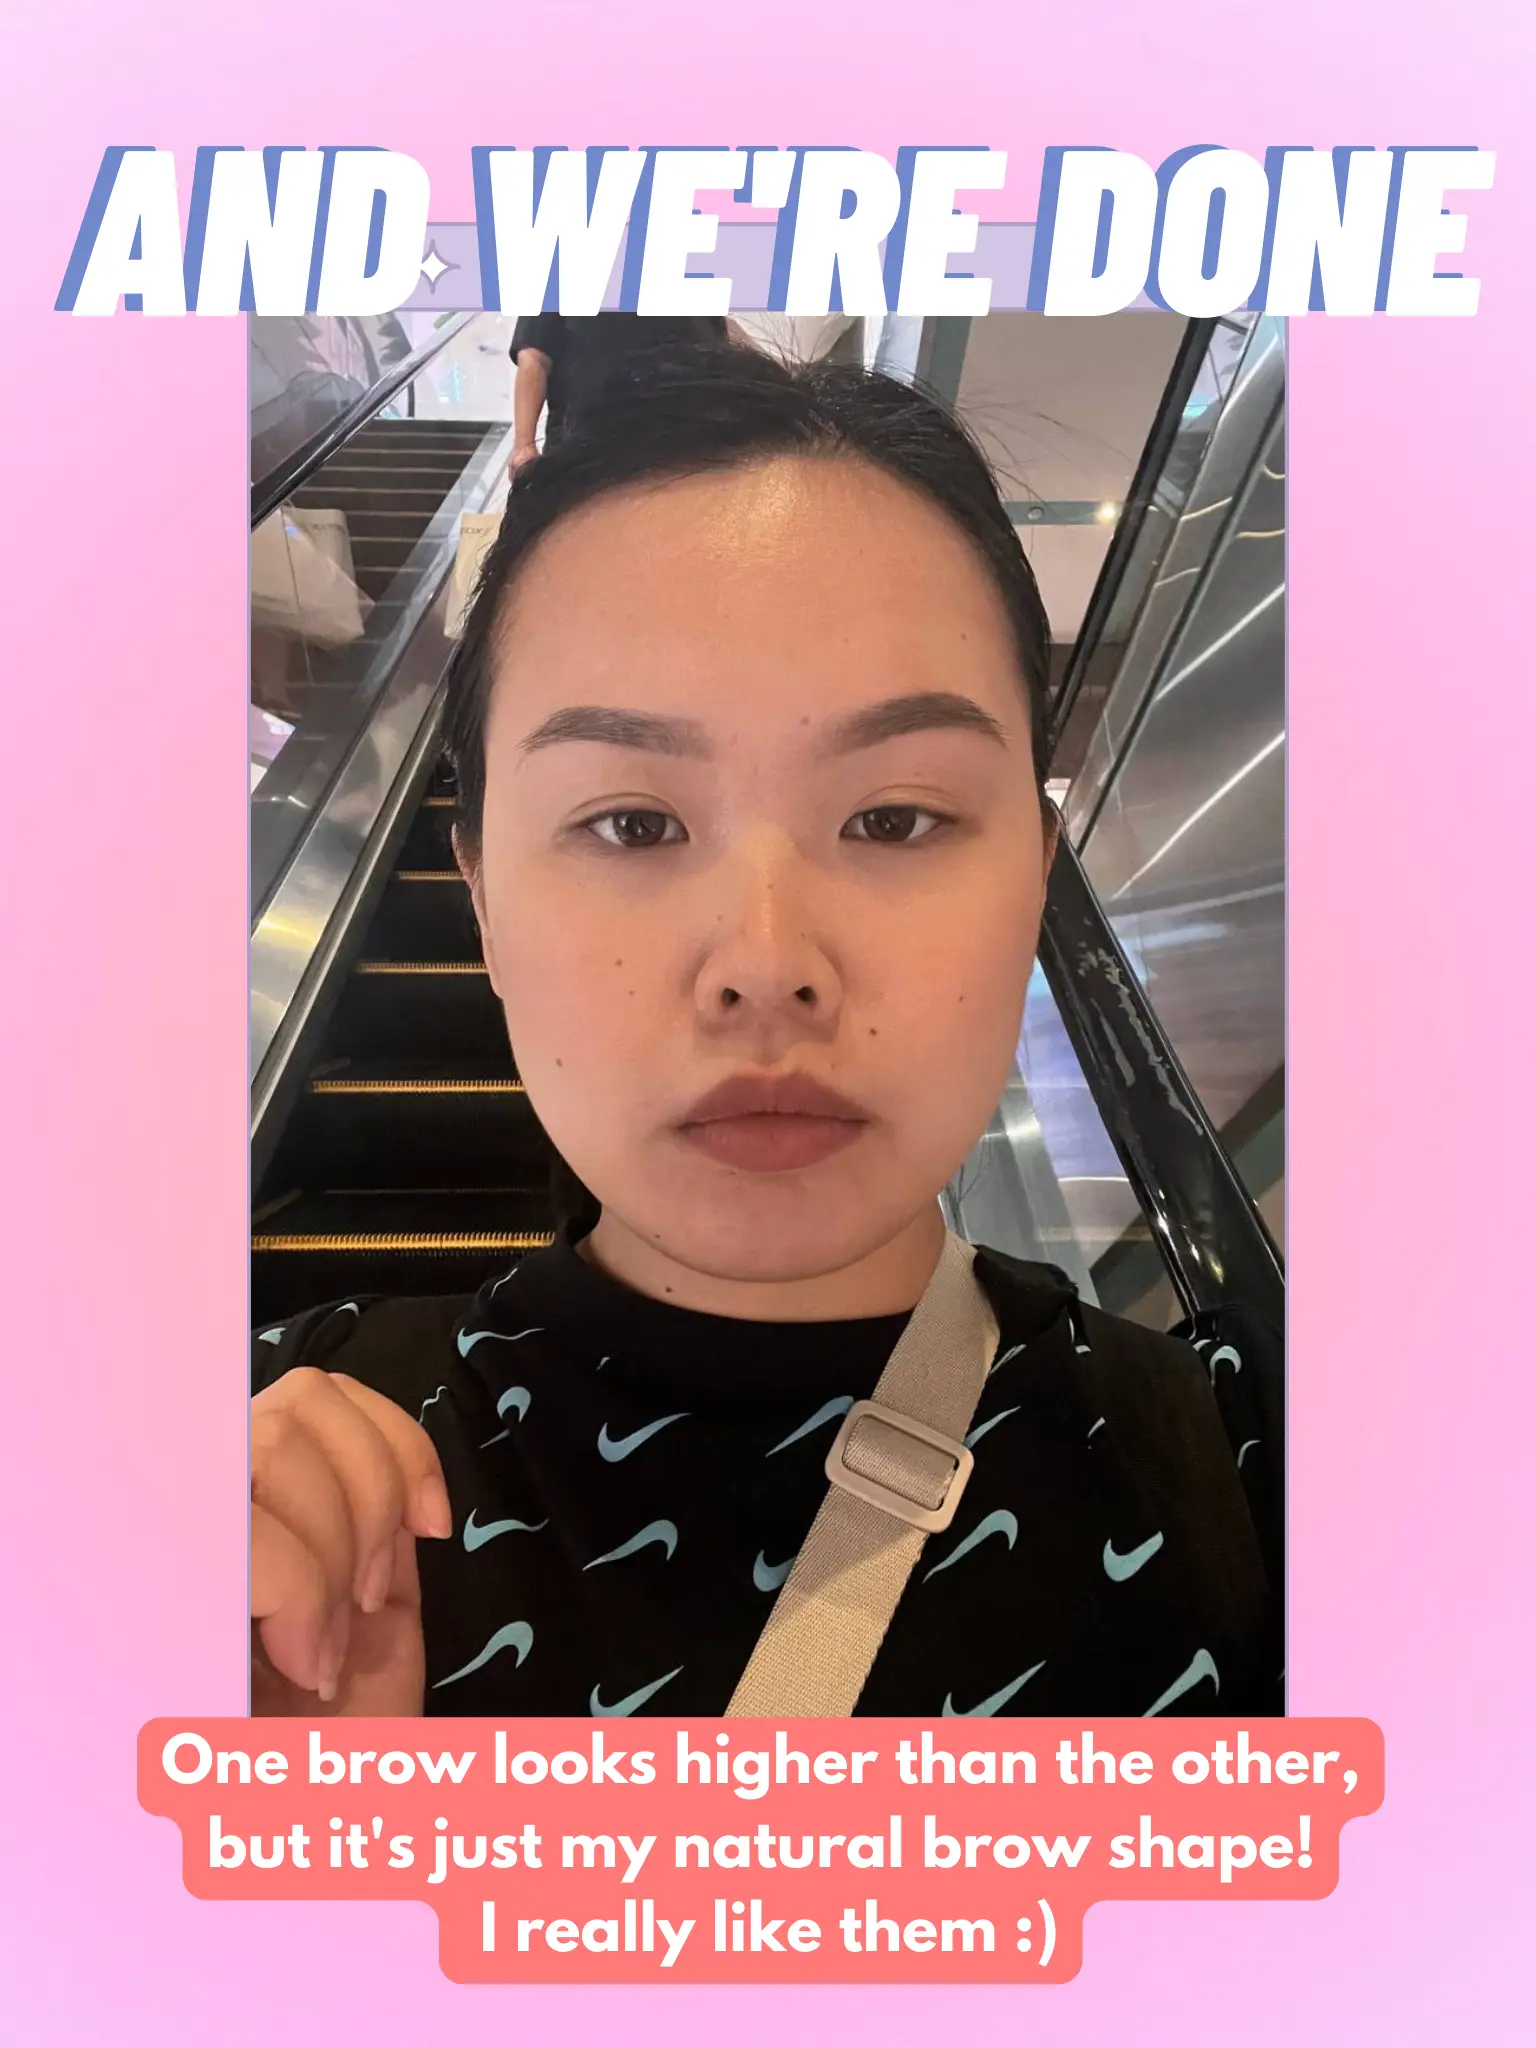 Waxing my brows at the Benefit Brow Bar - Actually Anna by Annaleid Bakker  - Transformation Coach, Former Elite Athlete, Beauty and Fashion Content  Creator, Podcaster, Data Scientist